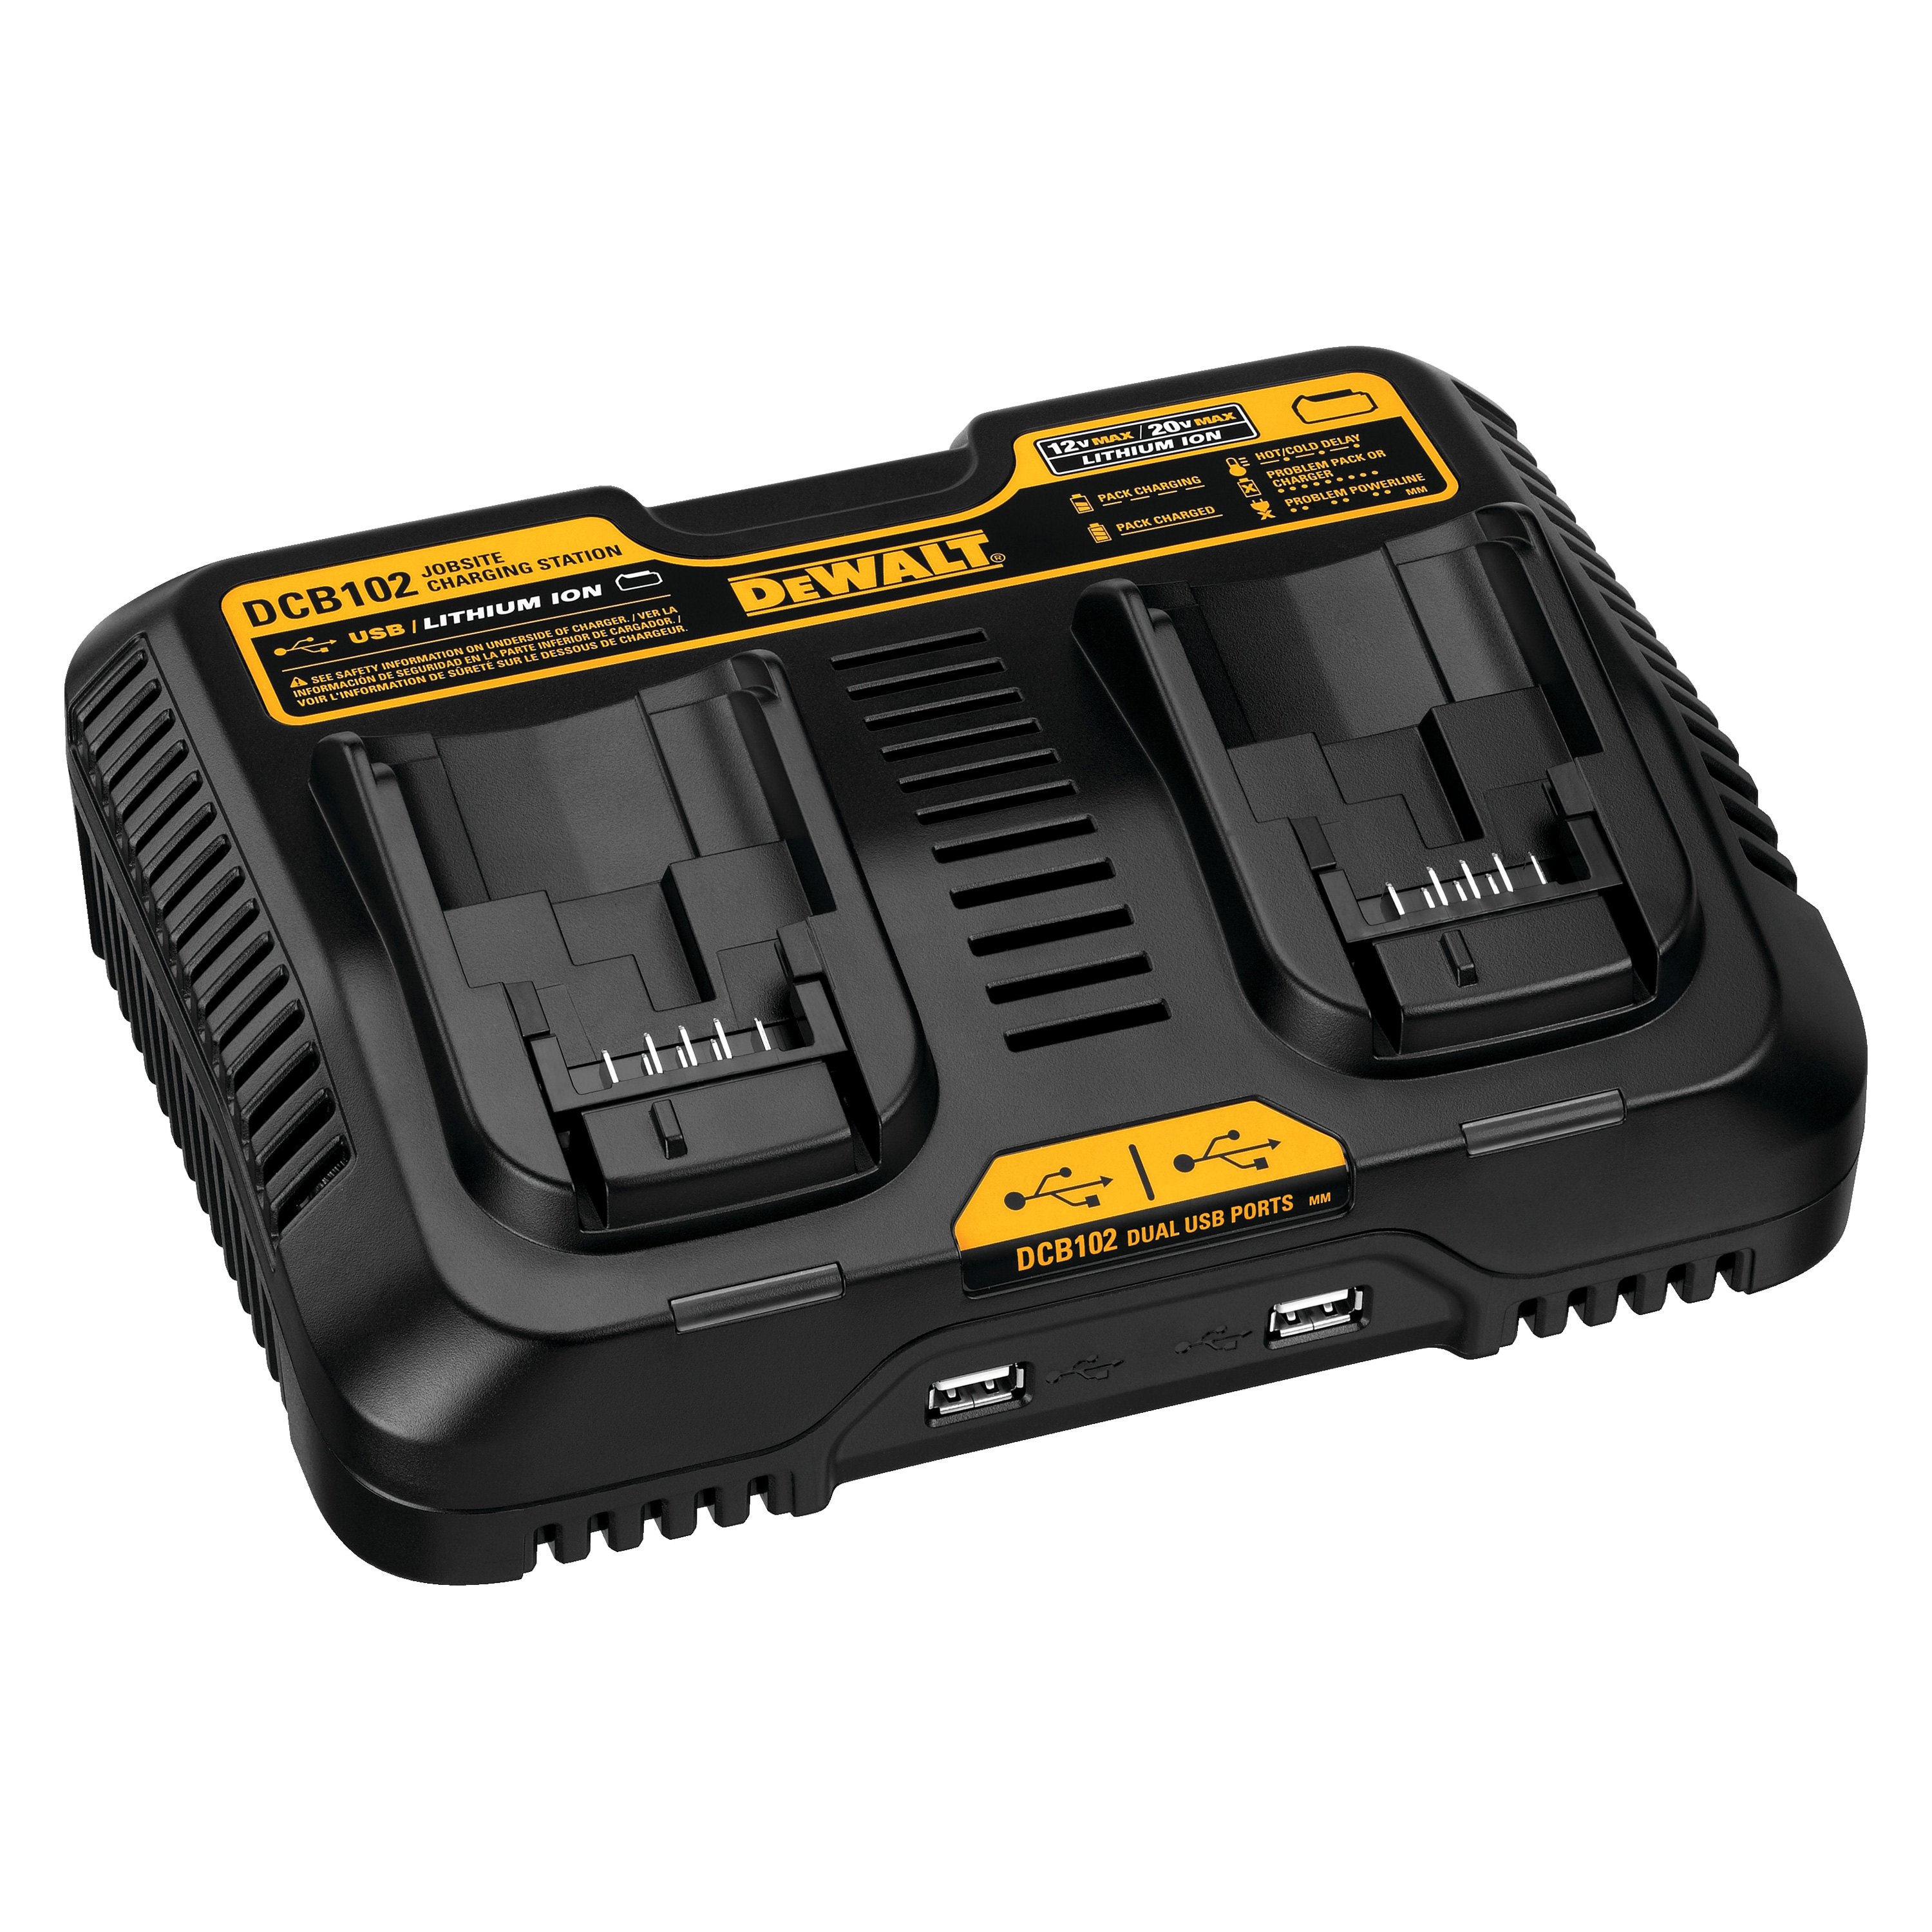 Black & Decker Lithium Battery Charger Not Working Troubleshooting 